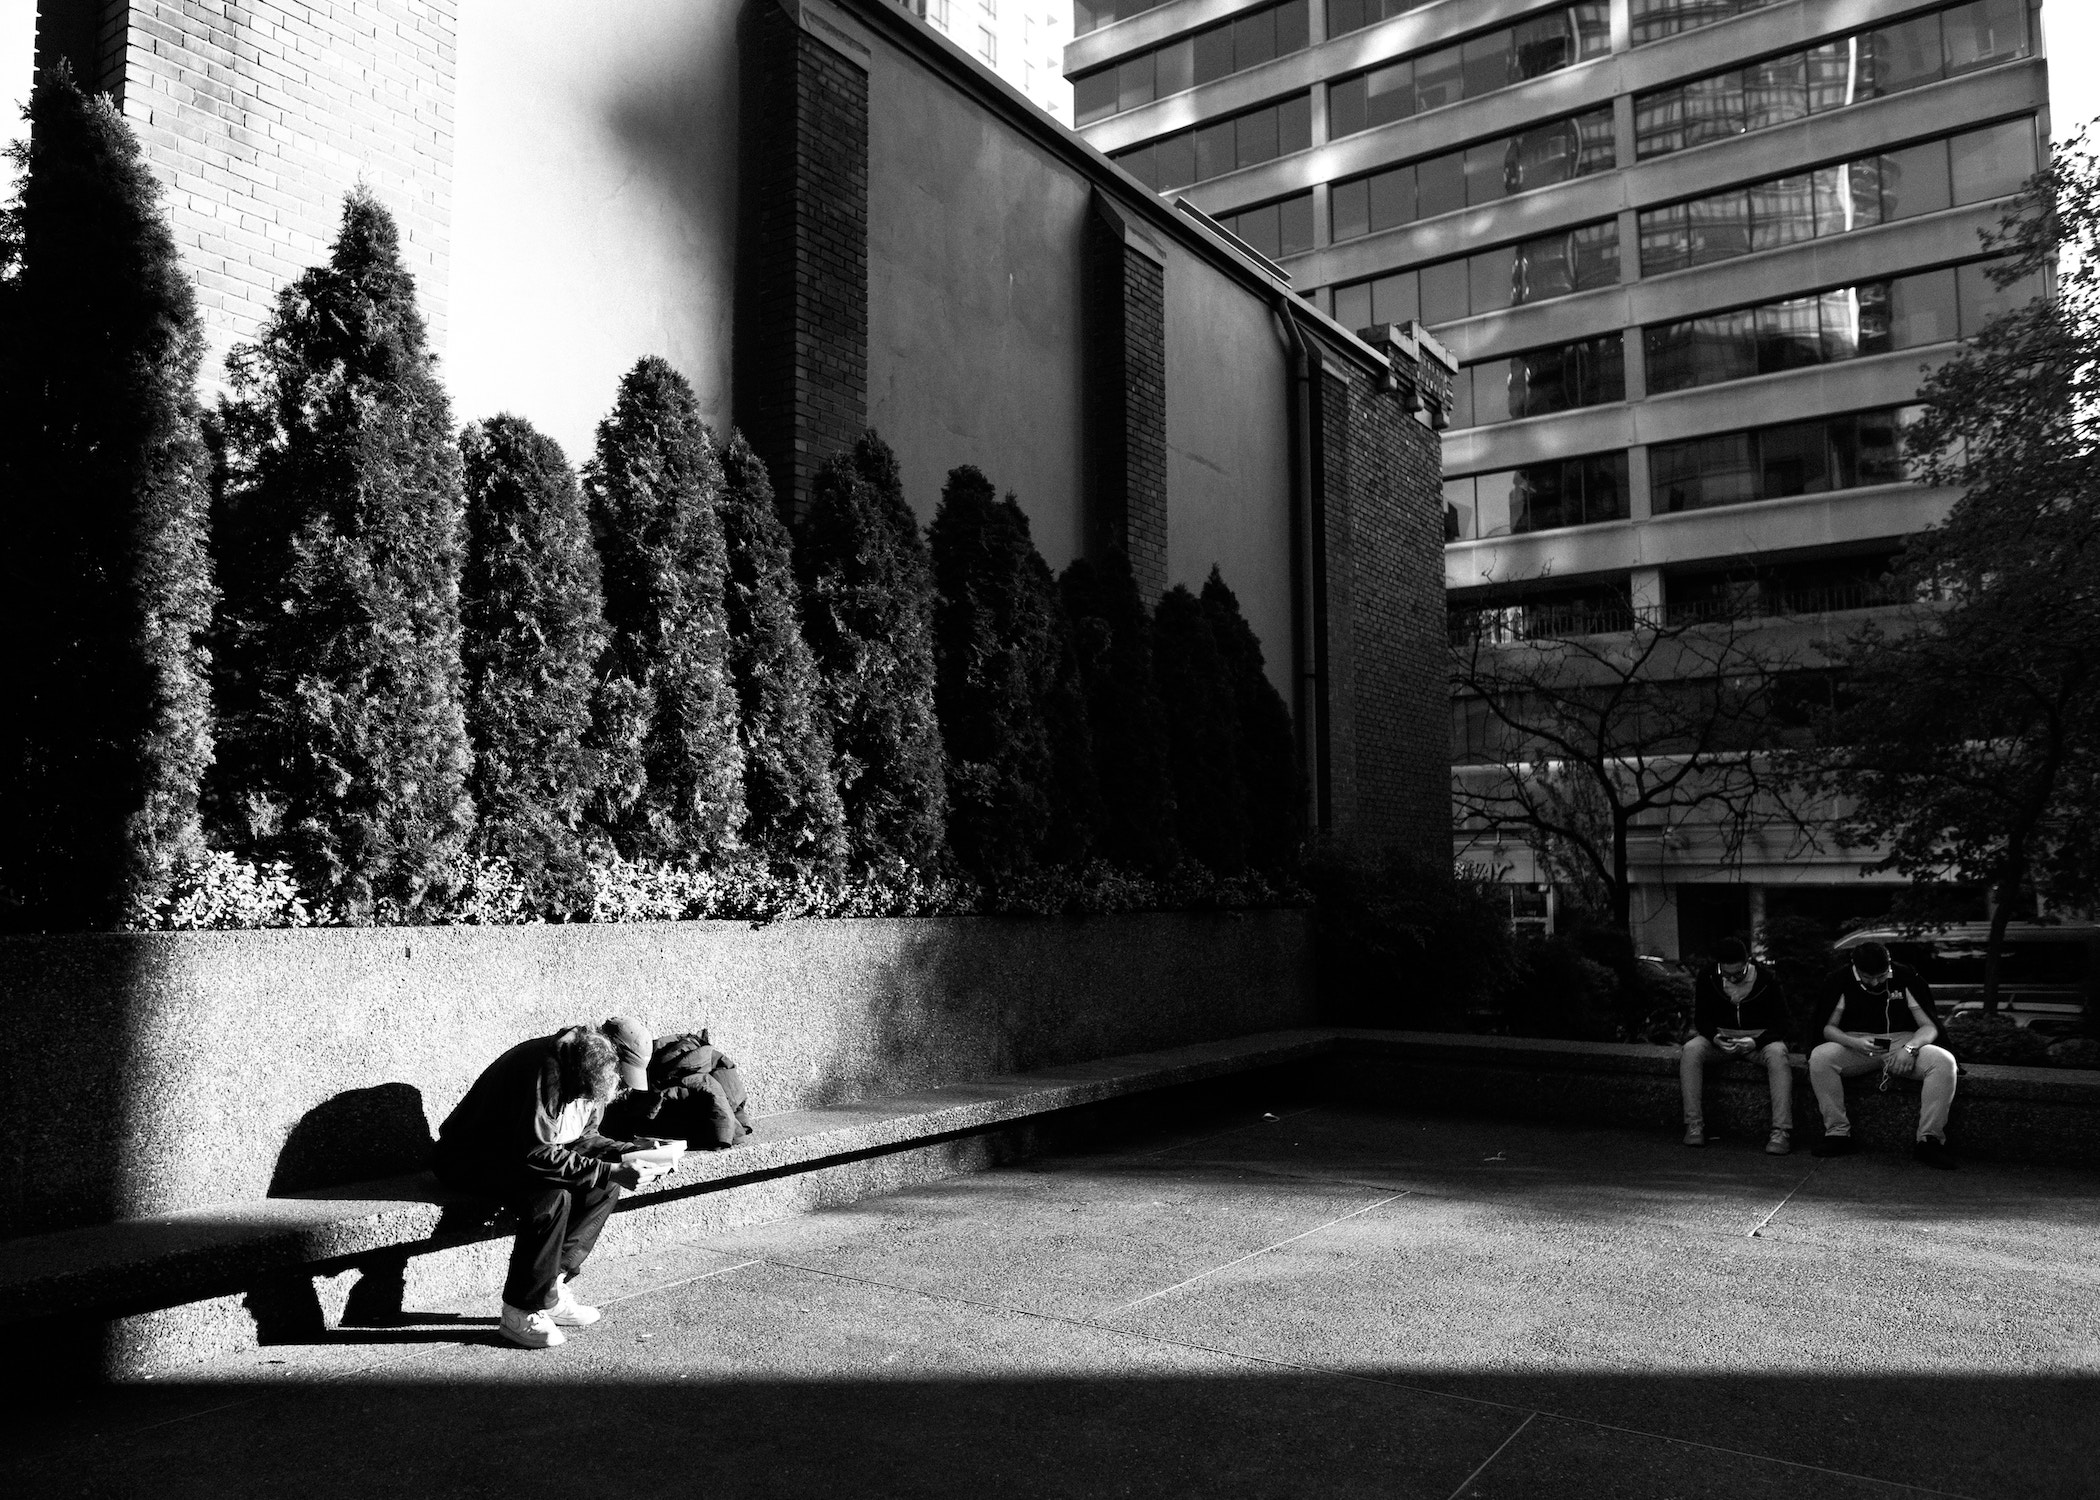 Three people on benches in city in b/w photo